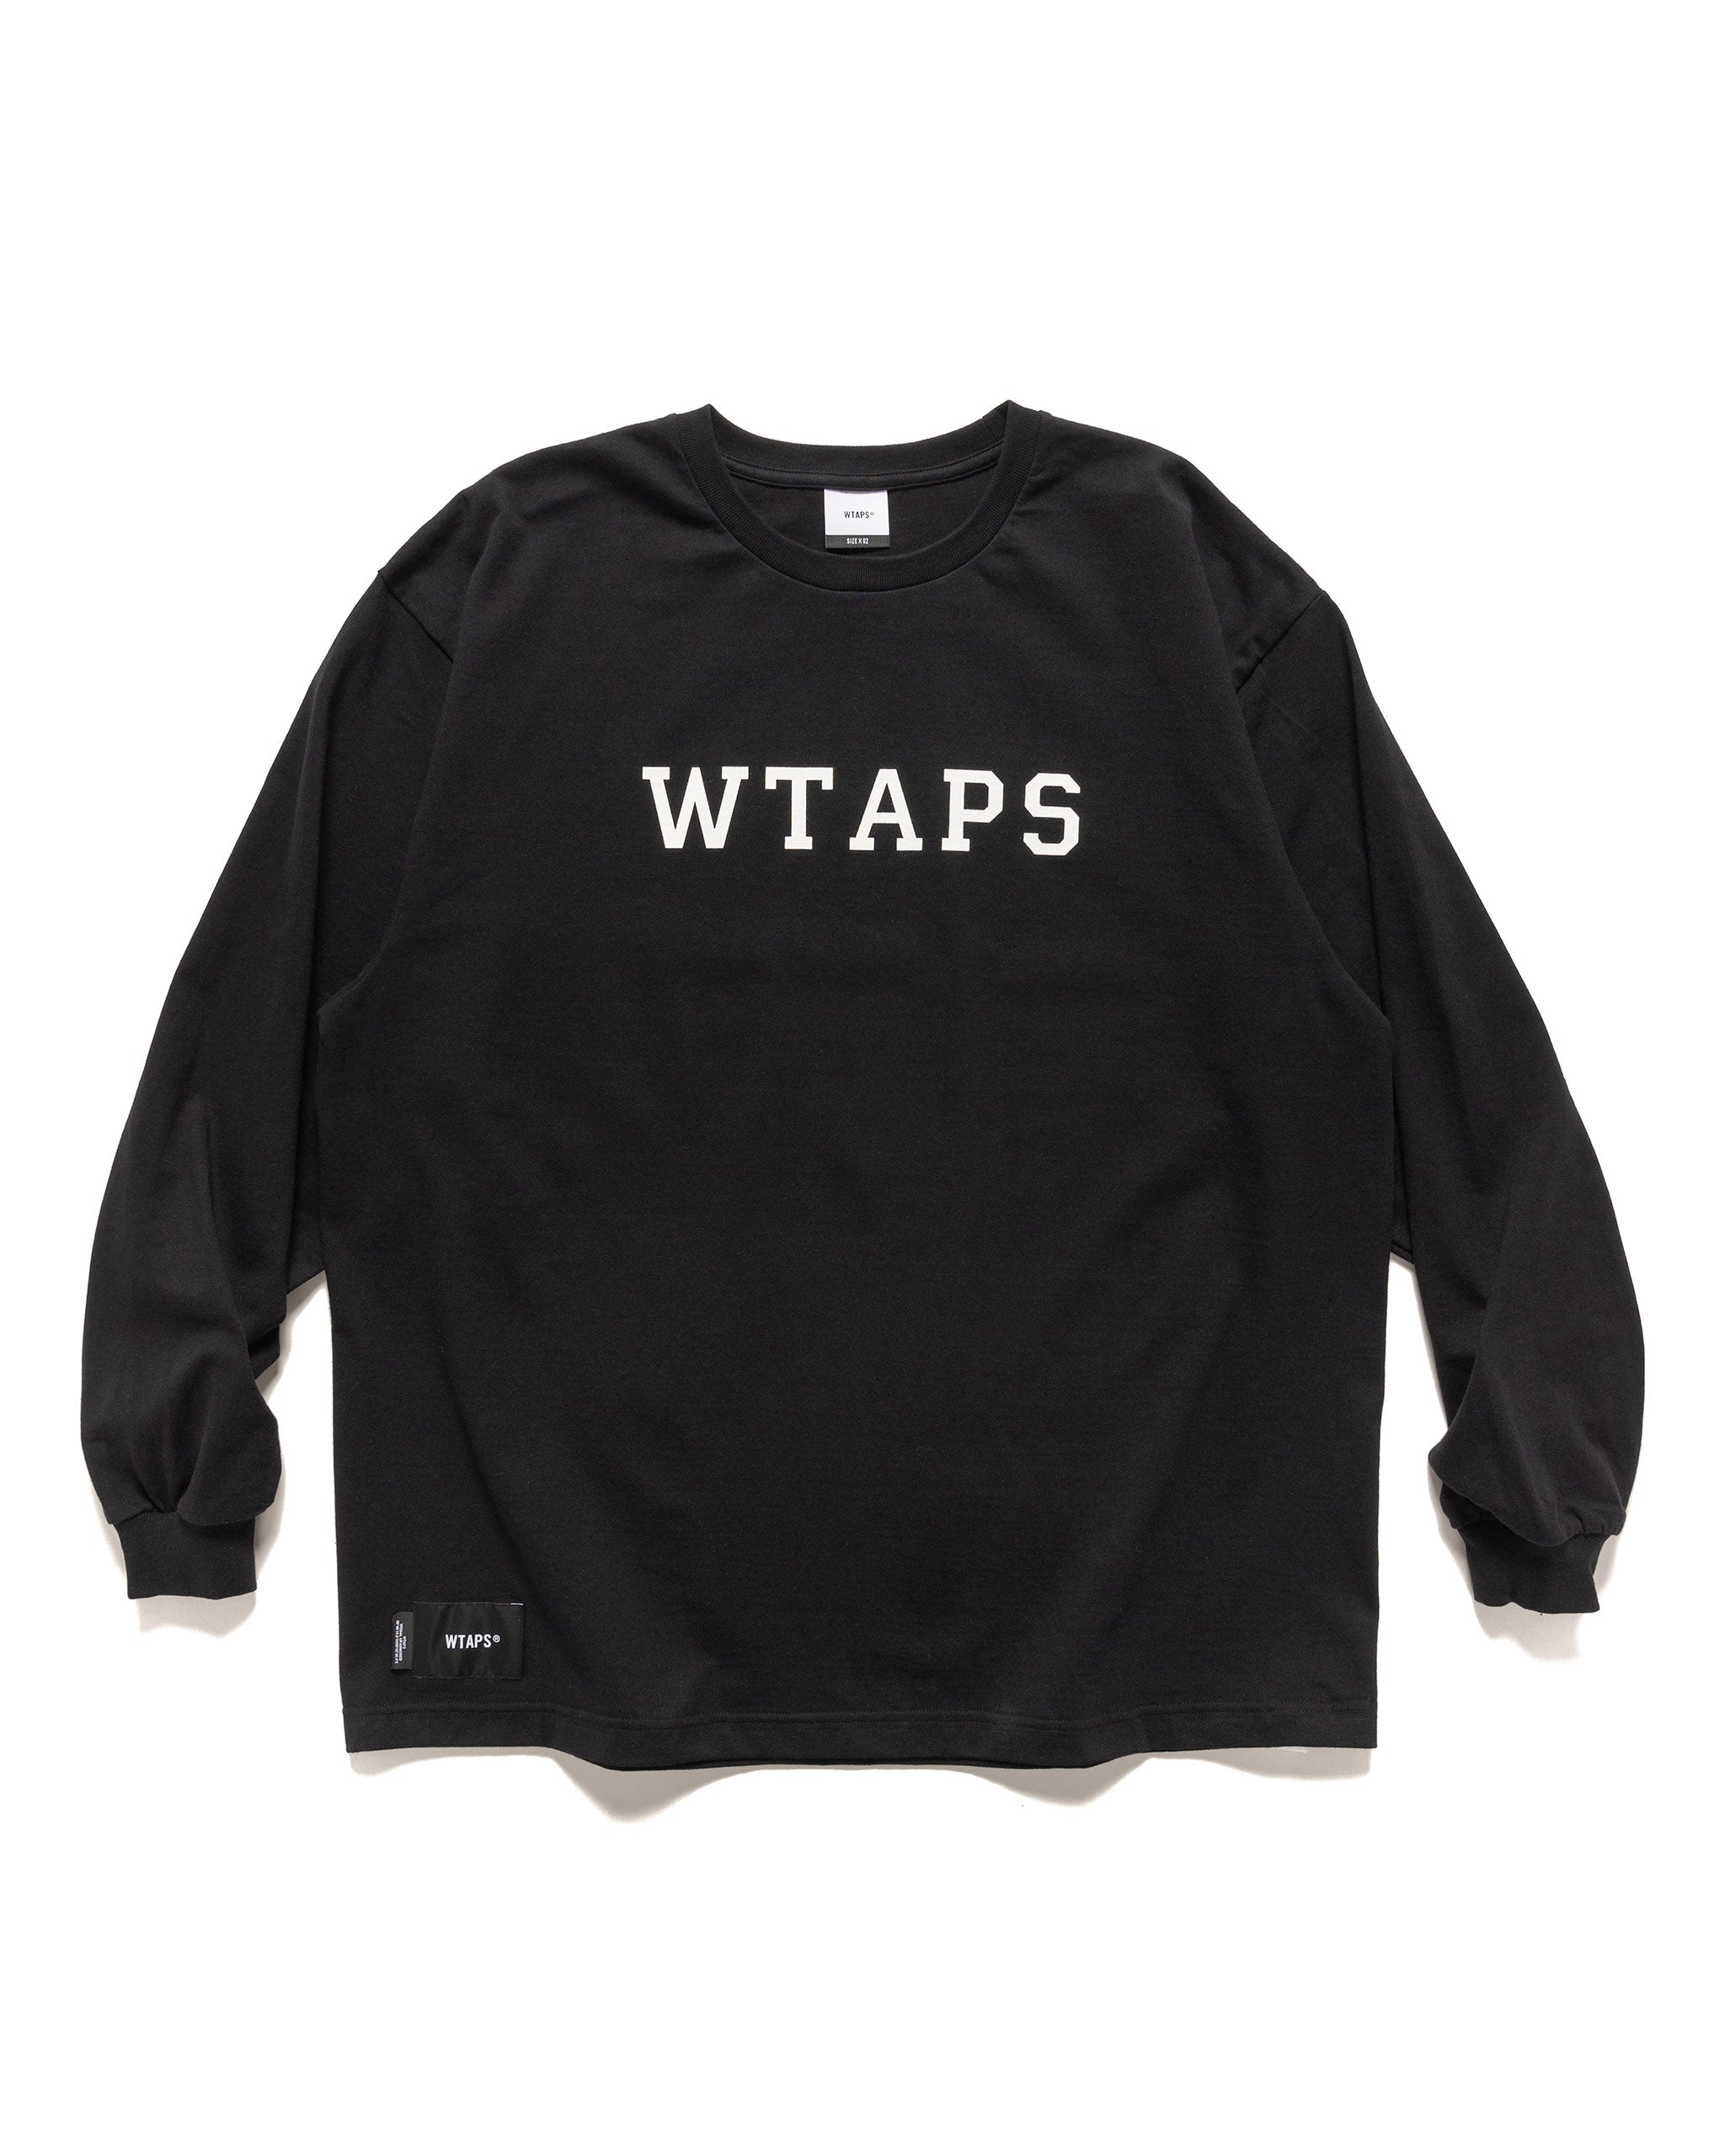 WTAPS | Mens SS23 Clothing at HAVEN | HAVEN